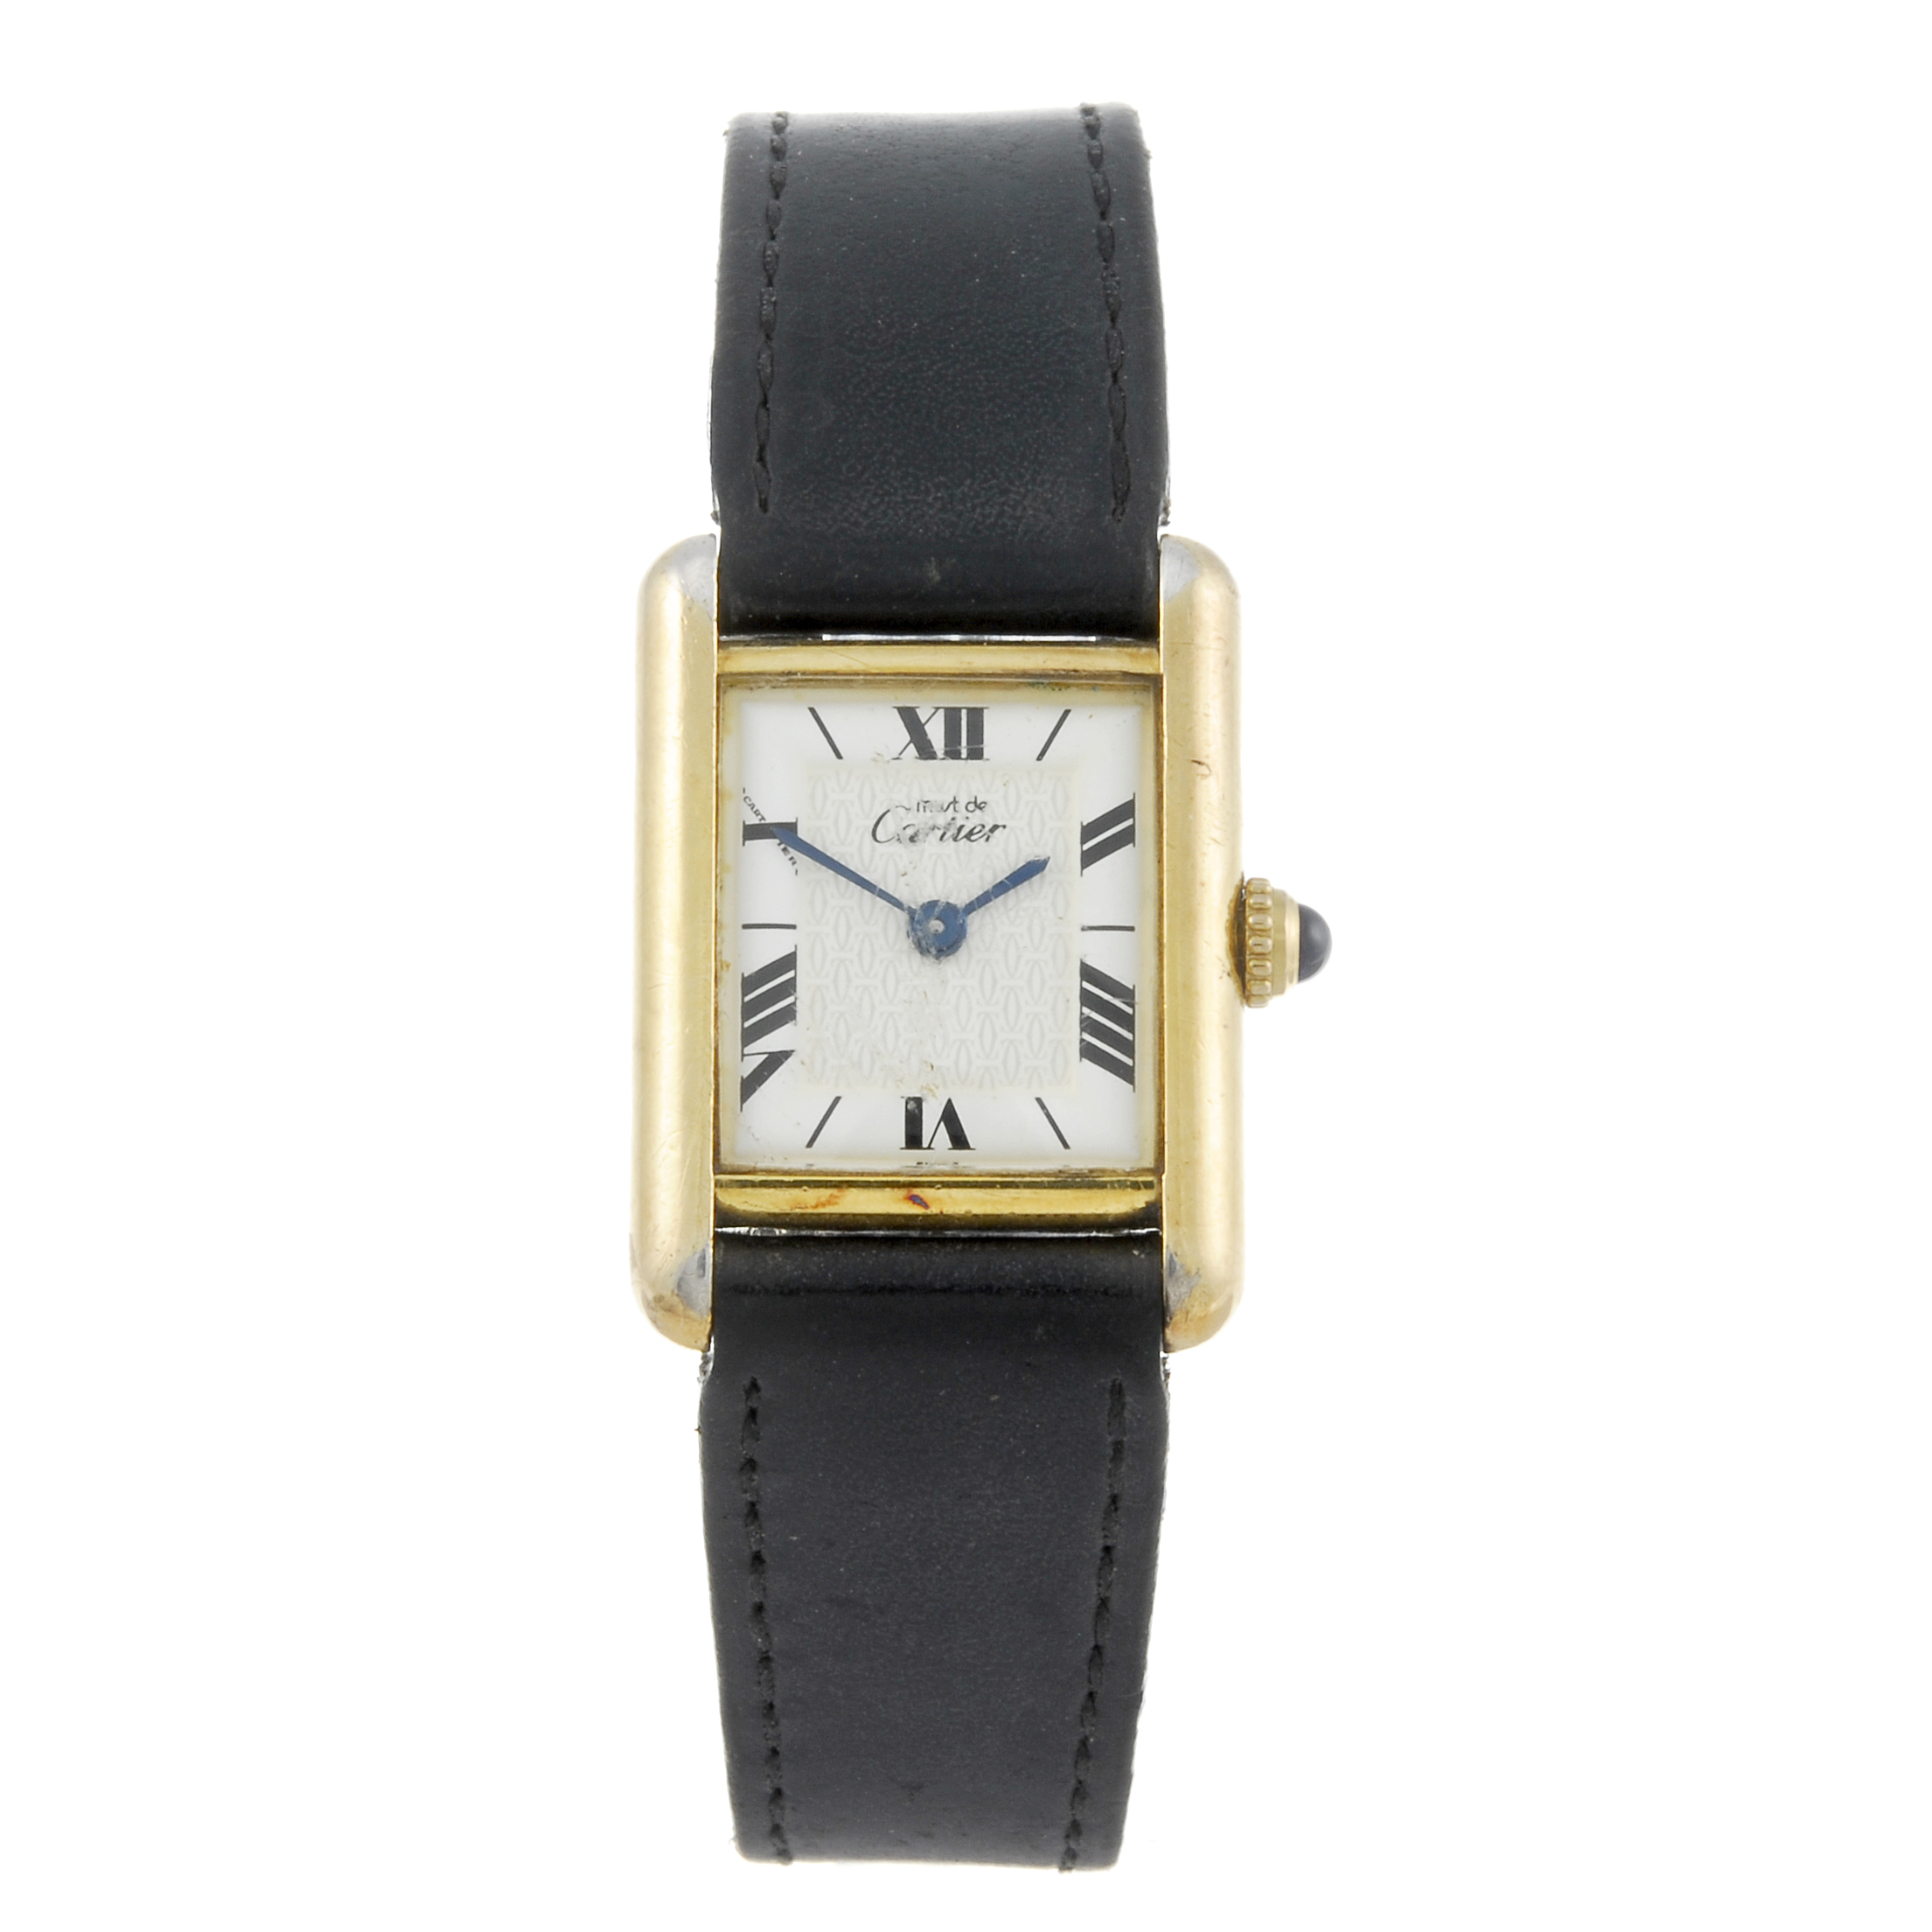 CARTIER - a Must De Cartier wrist watch. Gold plated silver case. Reference 1613, serial CC417879.